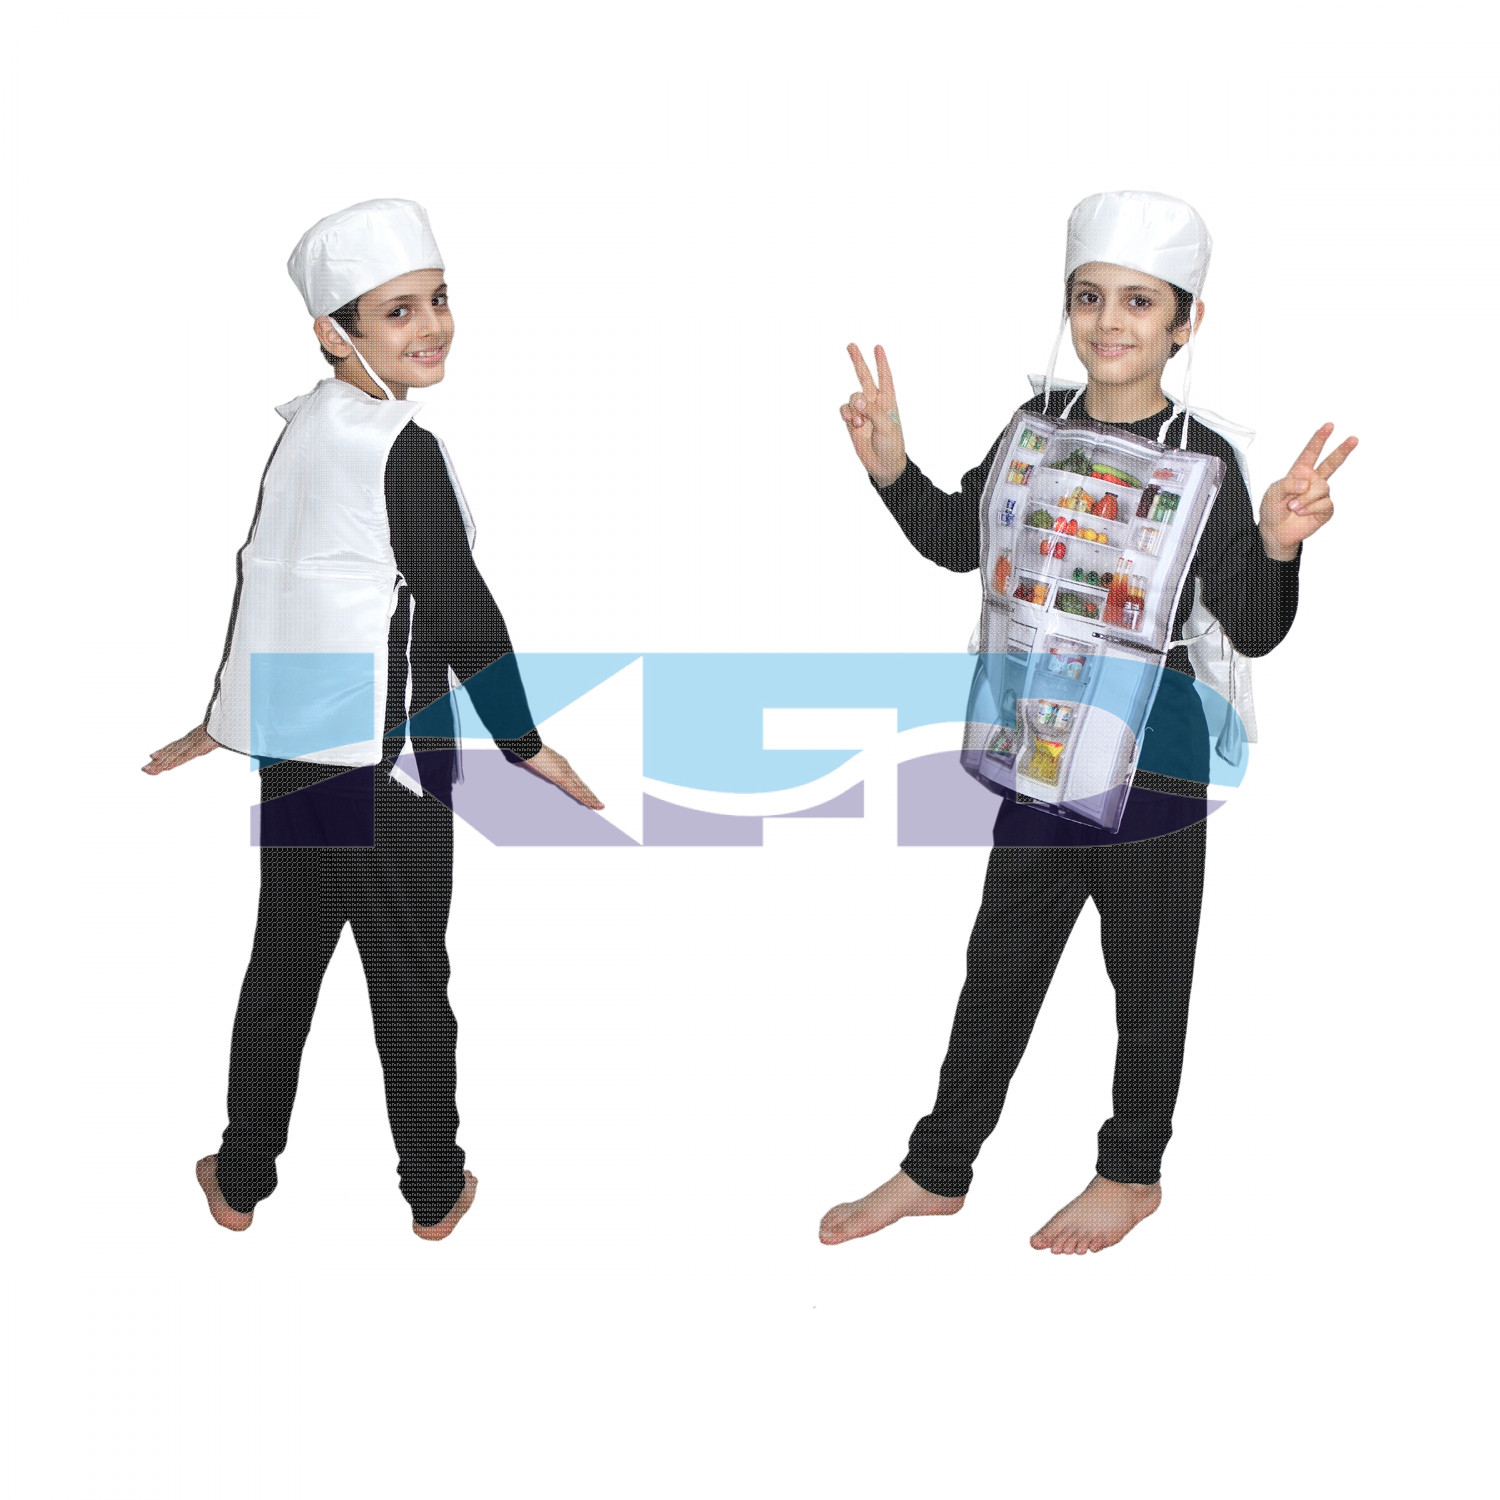 Refrigerator fancy dress for kids,Object Costume for School Annual function/Theme Party/Competition/Stage Shows Dress